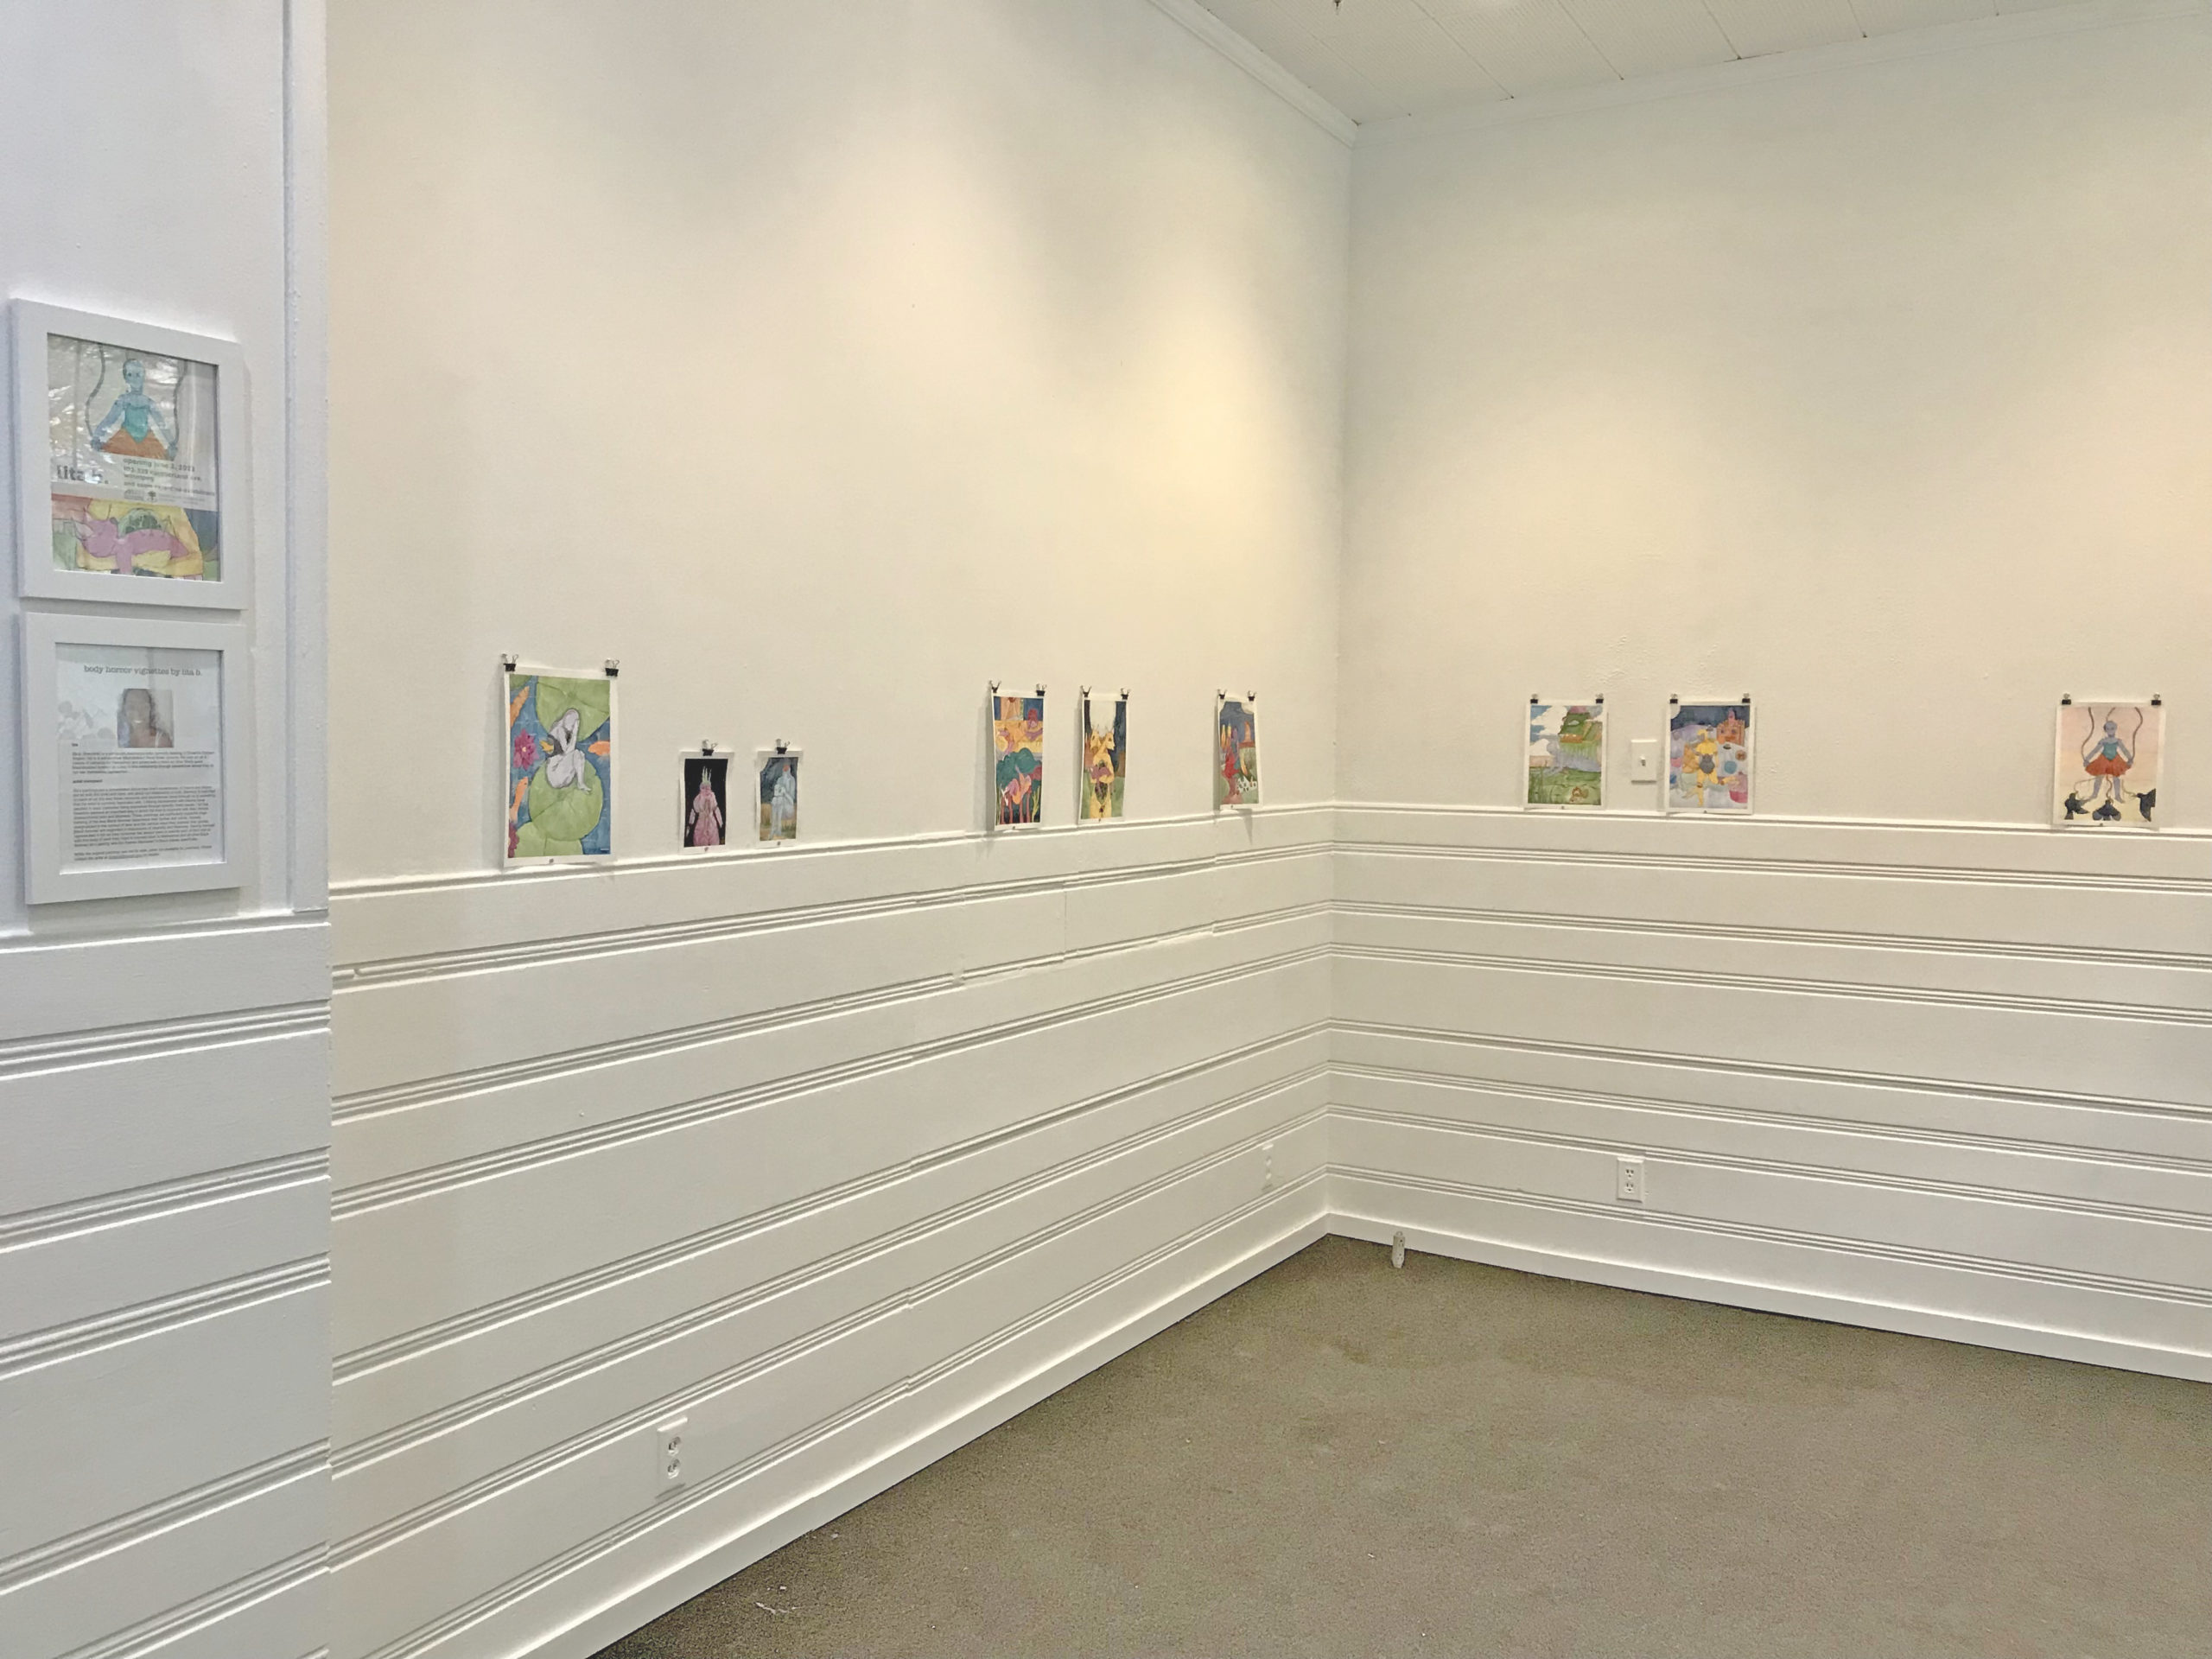 This is a photo of the AANM Gallery displaying artwork by lita b. The walls are white.